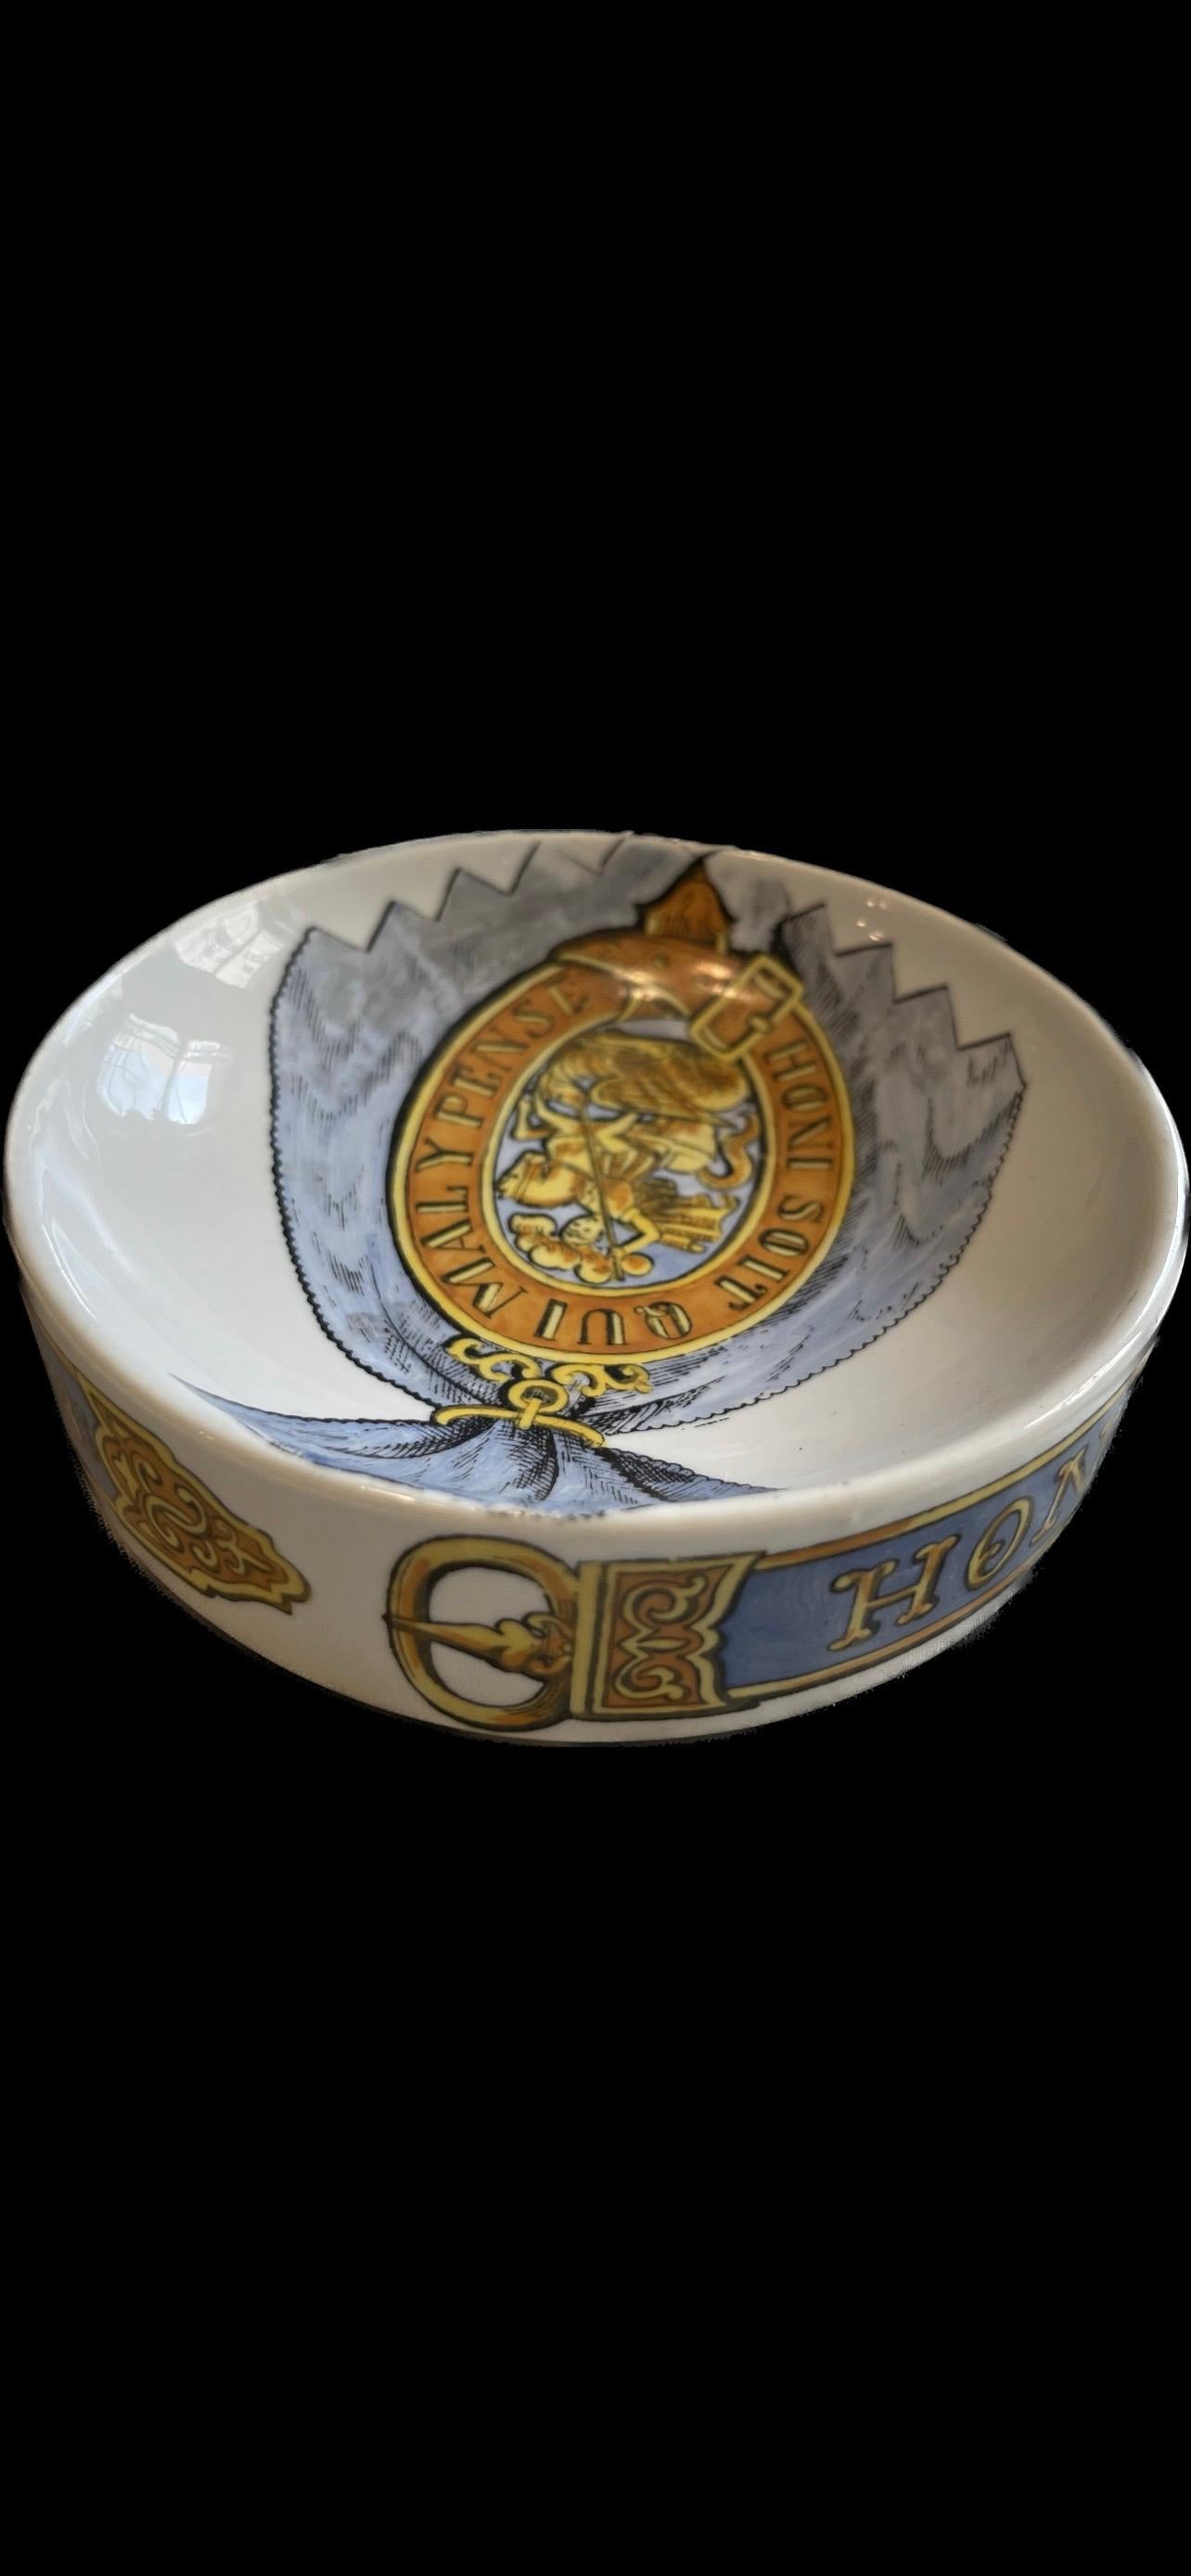 Yellow and blue hand painted ceramic concave transferware ashtray from Piero Fornasetti, designed and produced in the 1950s-1960s. Pictured among its other variations in the Fornasetti Complete Universe book on p. 577. Very good condition, a bit